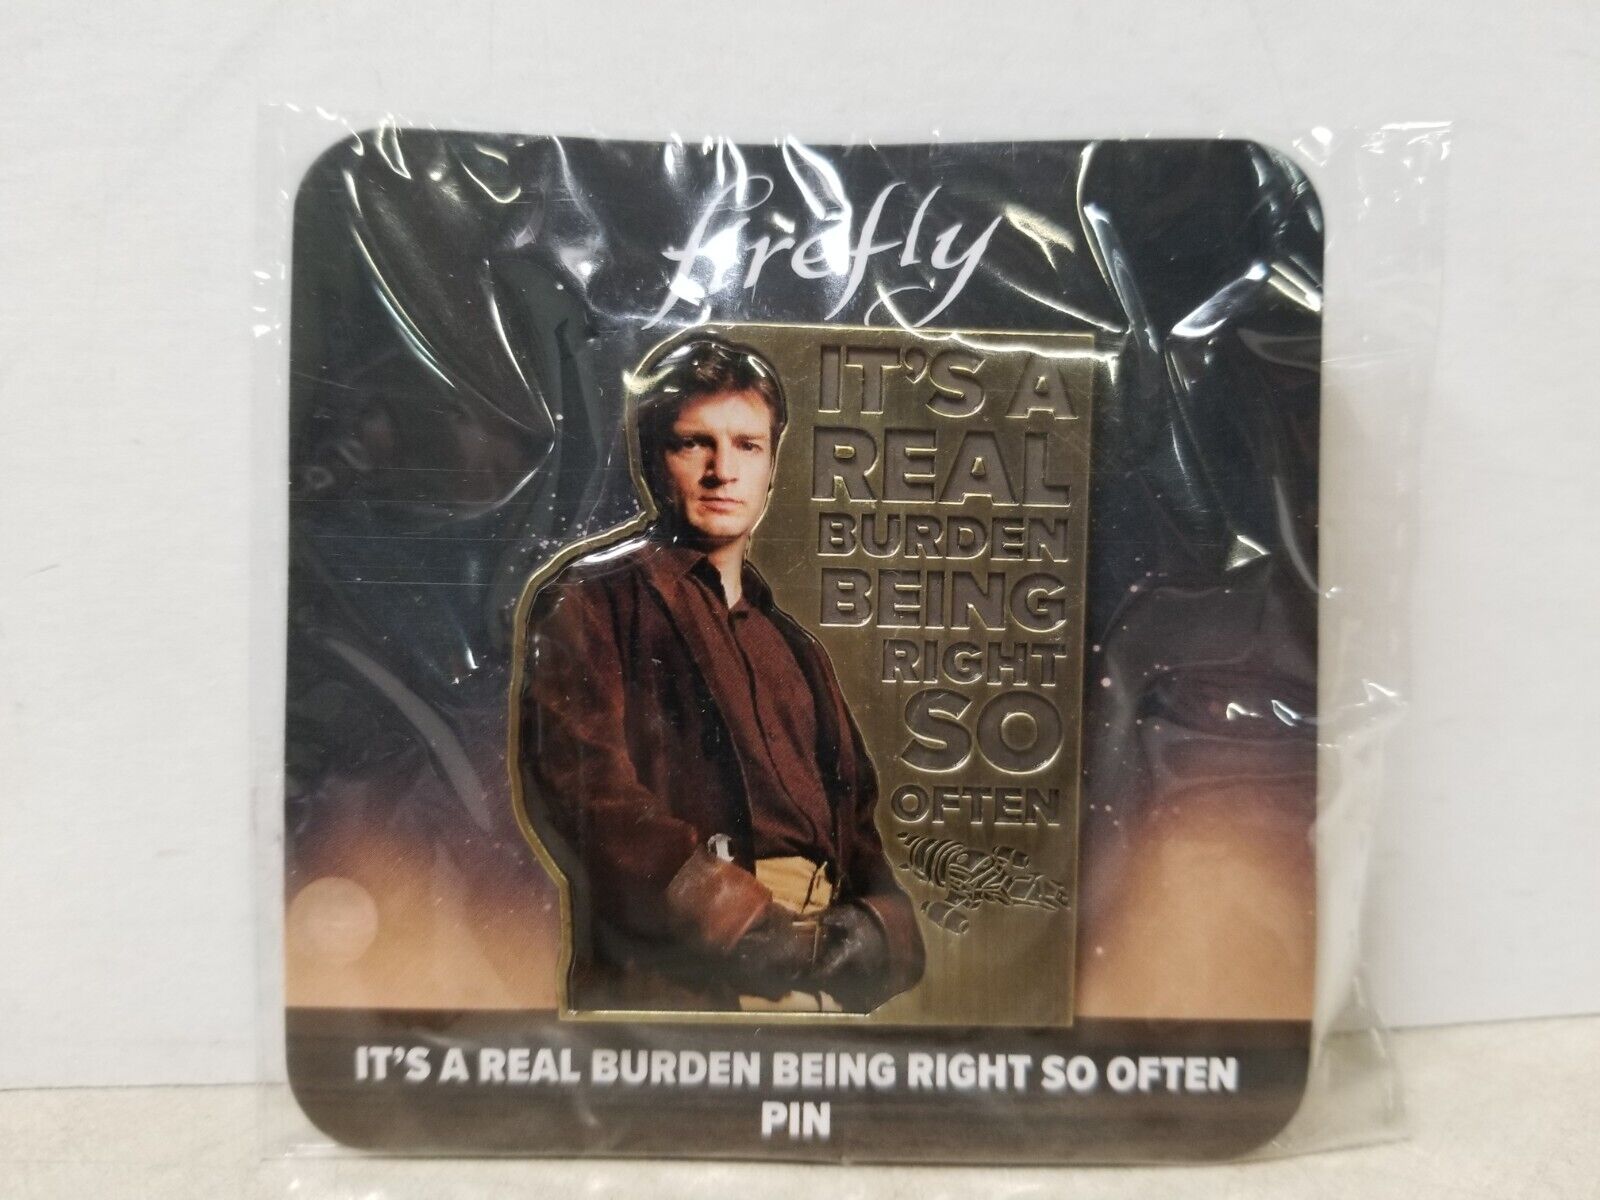 FIREFLY SERENITY ‘REAL BURDEN BEING RIGHT SO OFTEN’ NATHAN FILLION PIN 